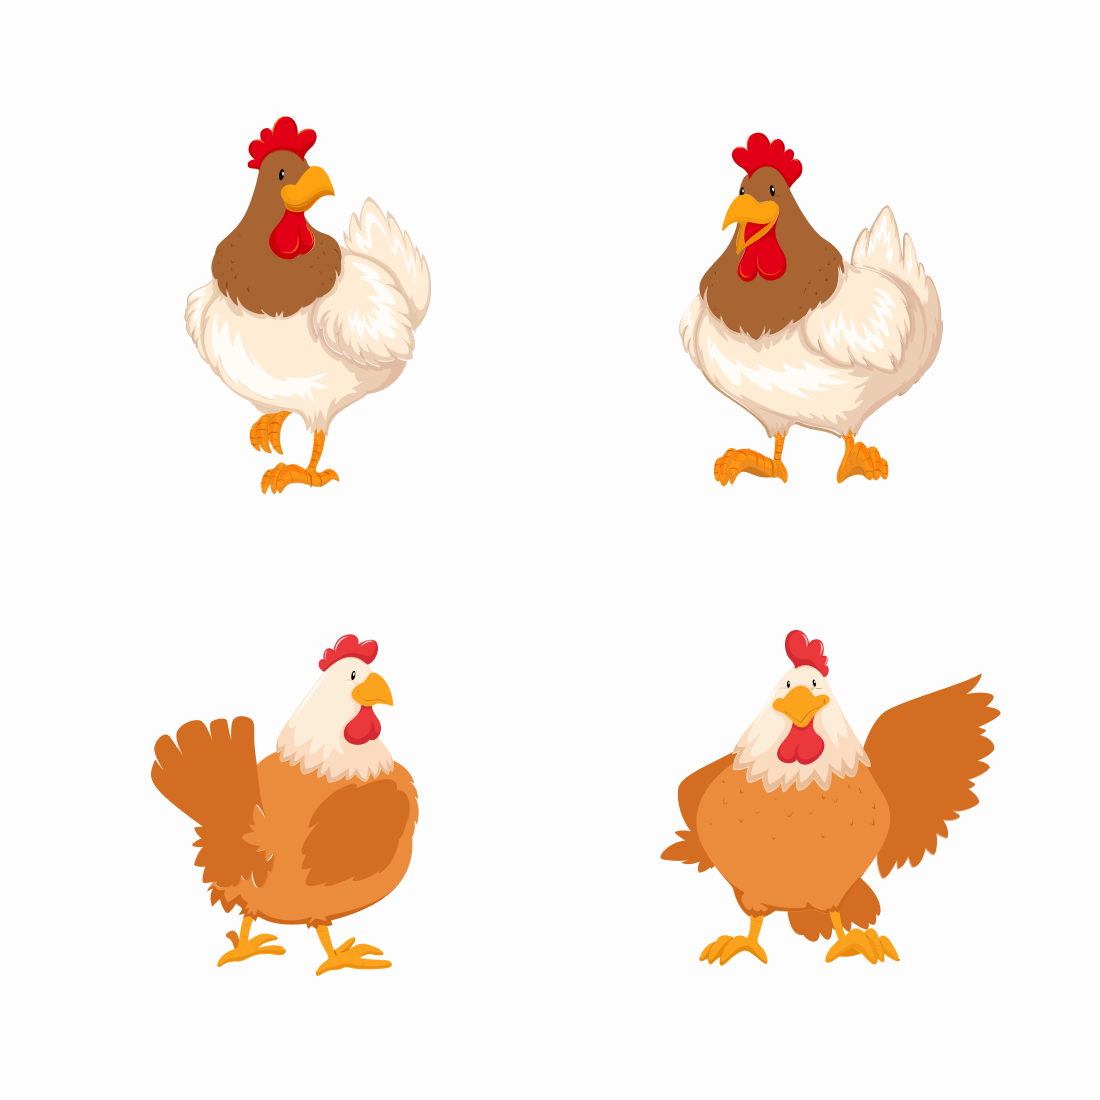 Group of chickens standing next to each other.